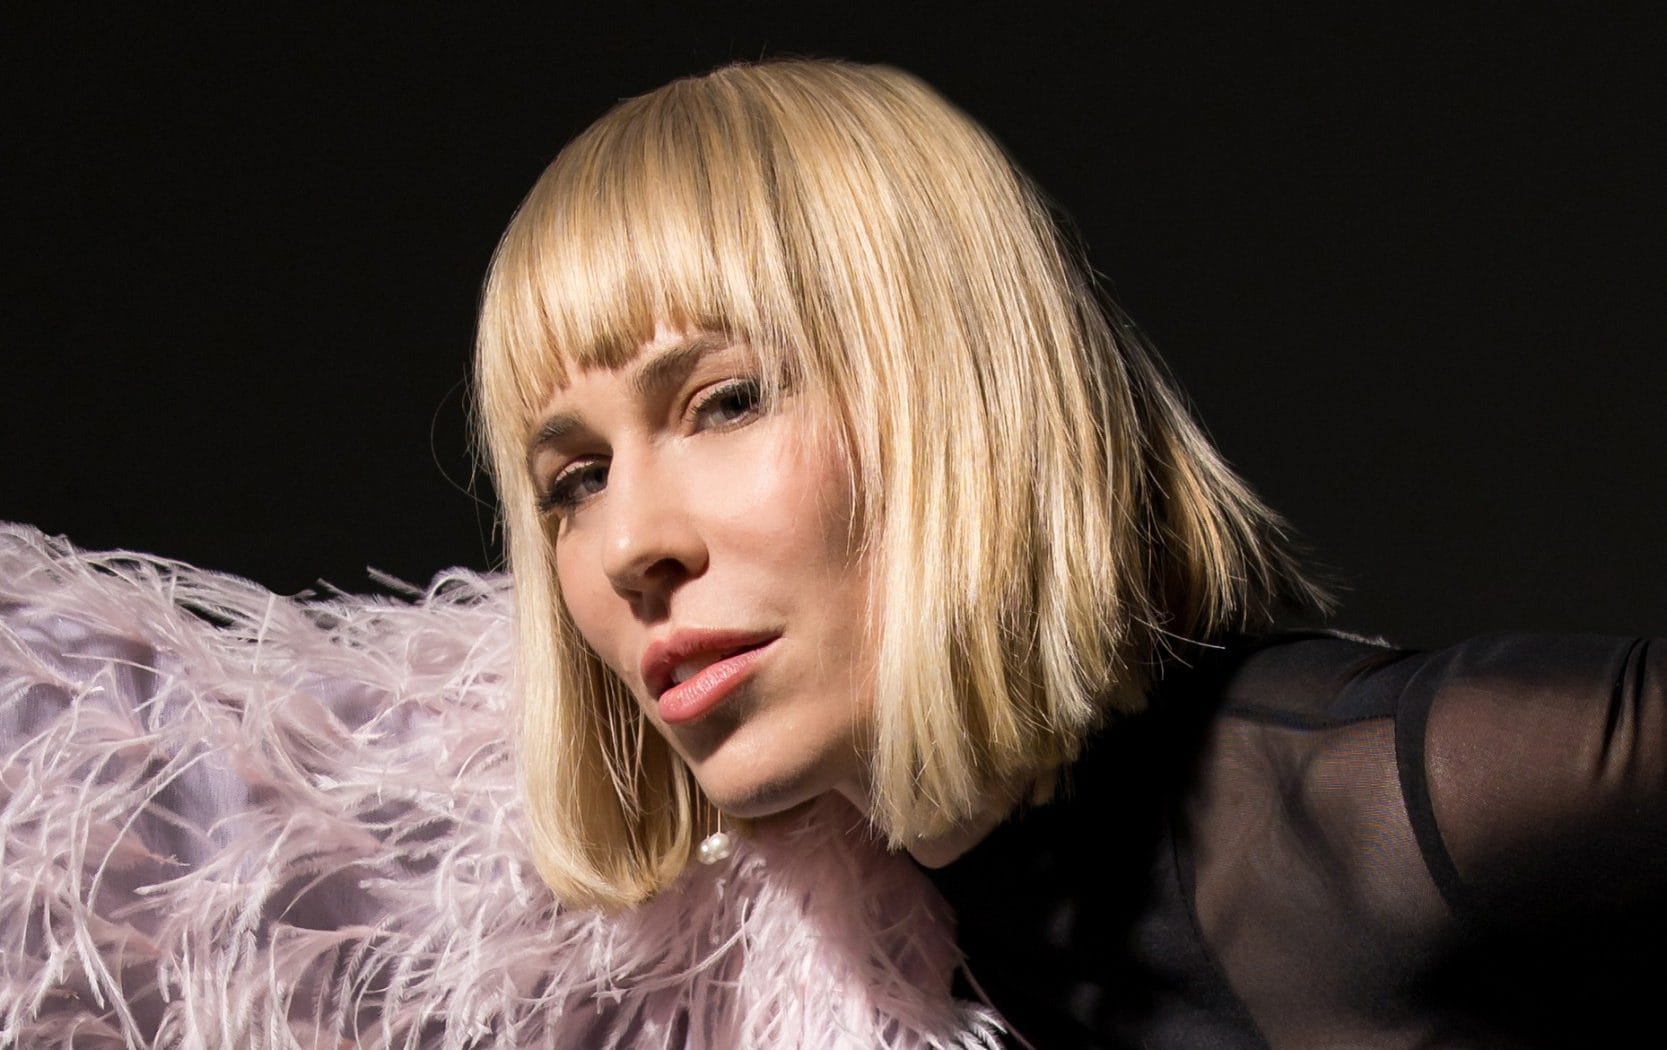 Natasha Bedingfield: ‘Prince told me to come over any time – but didn’t give me his number’